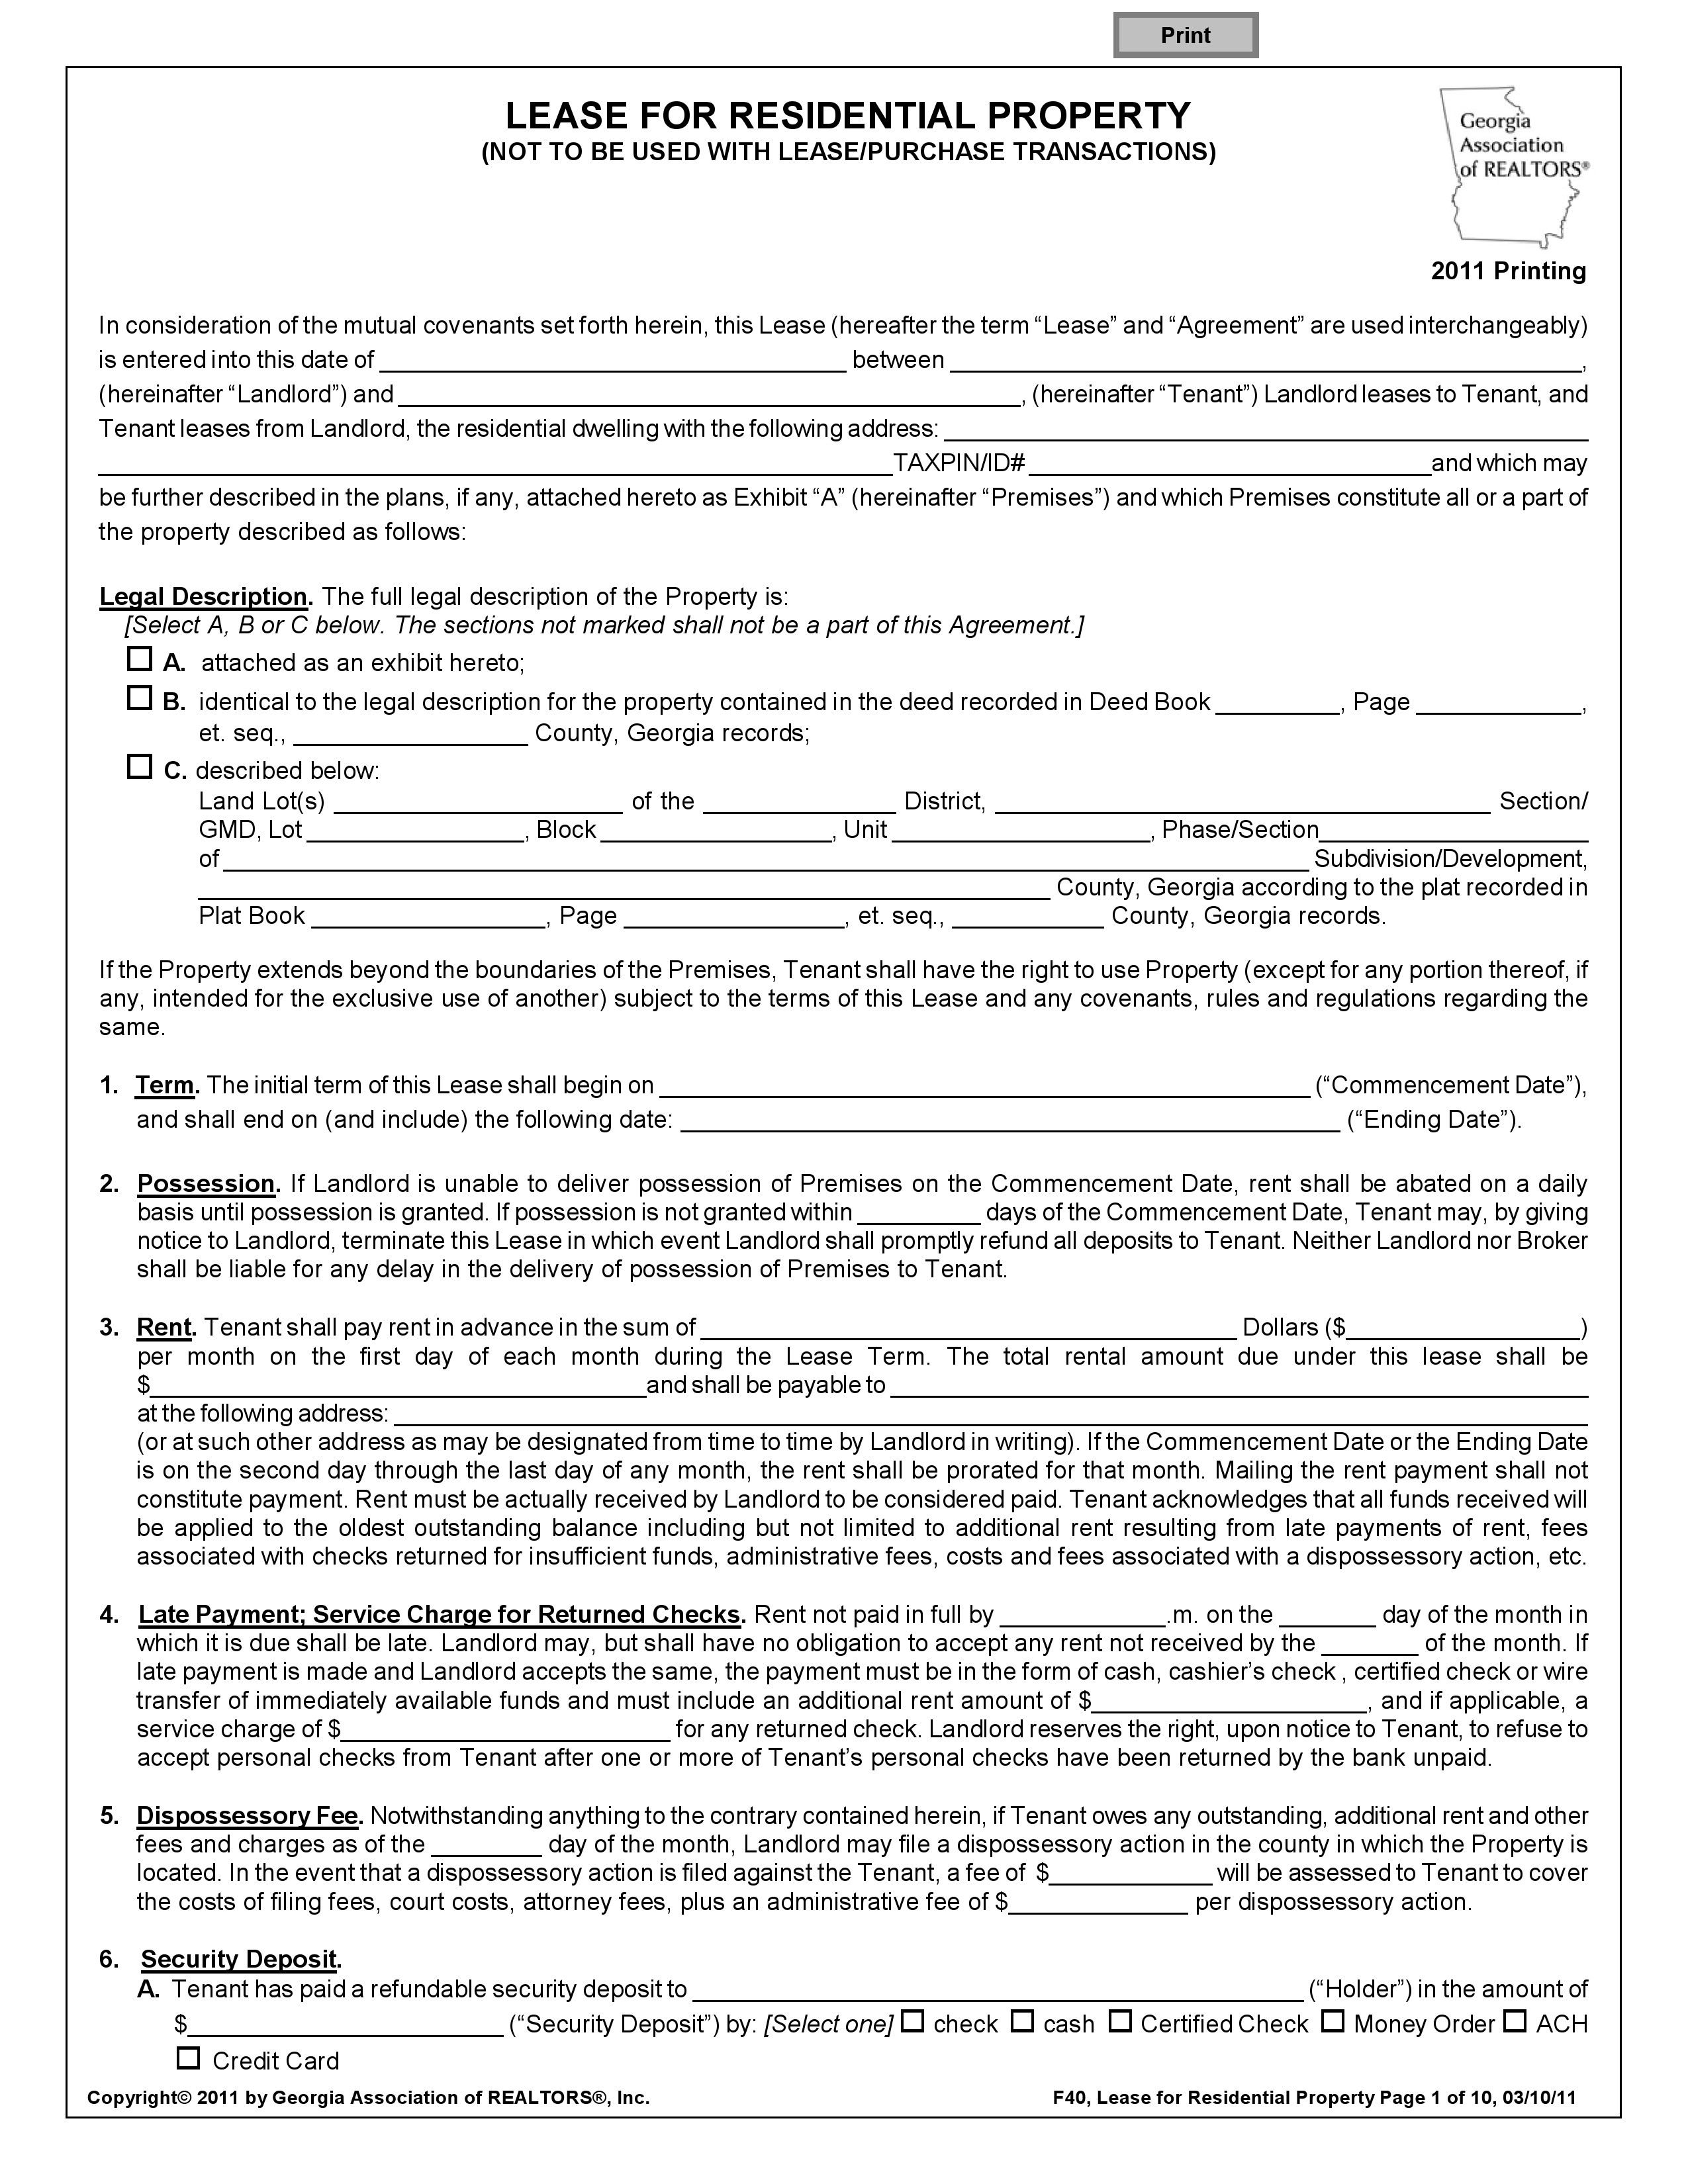 Free Georgia Residential Lease Agreement | Pdf Template | Form Download - Free Printable Residential Rental Agreement Forms